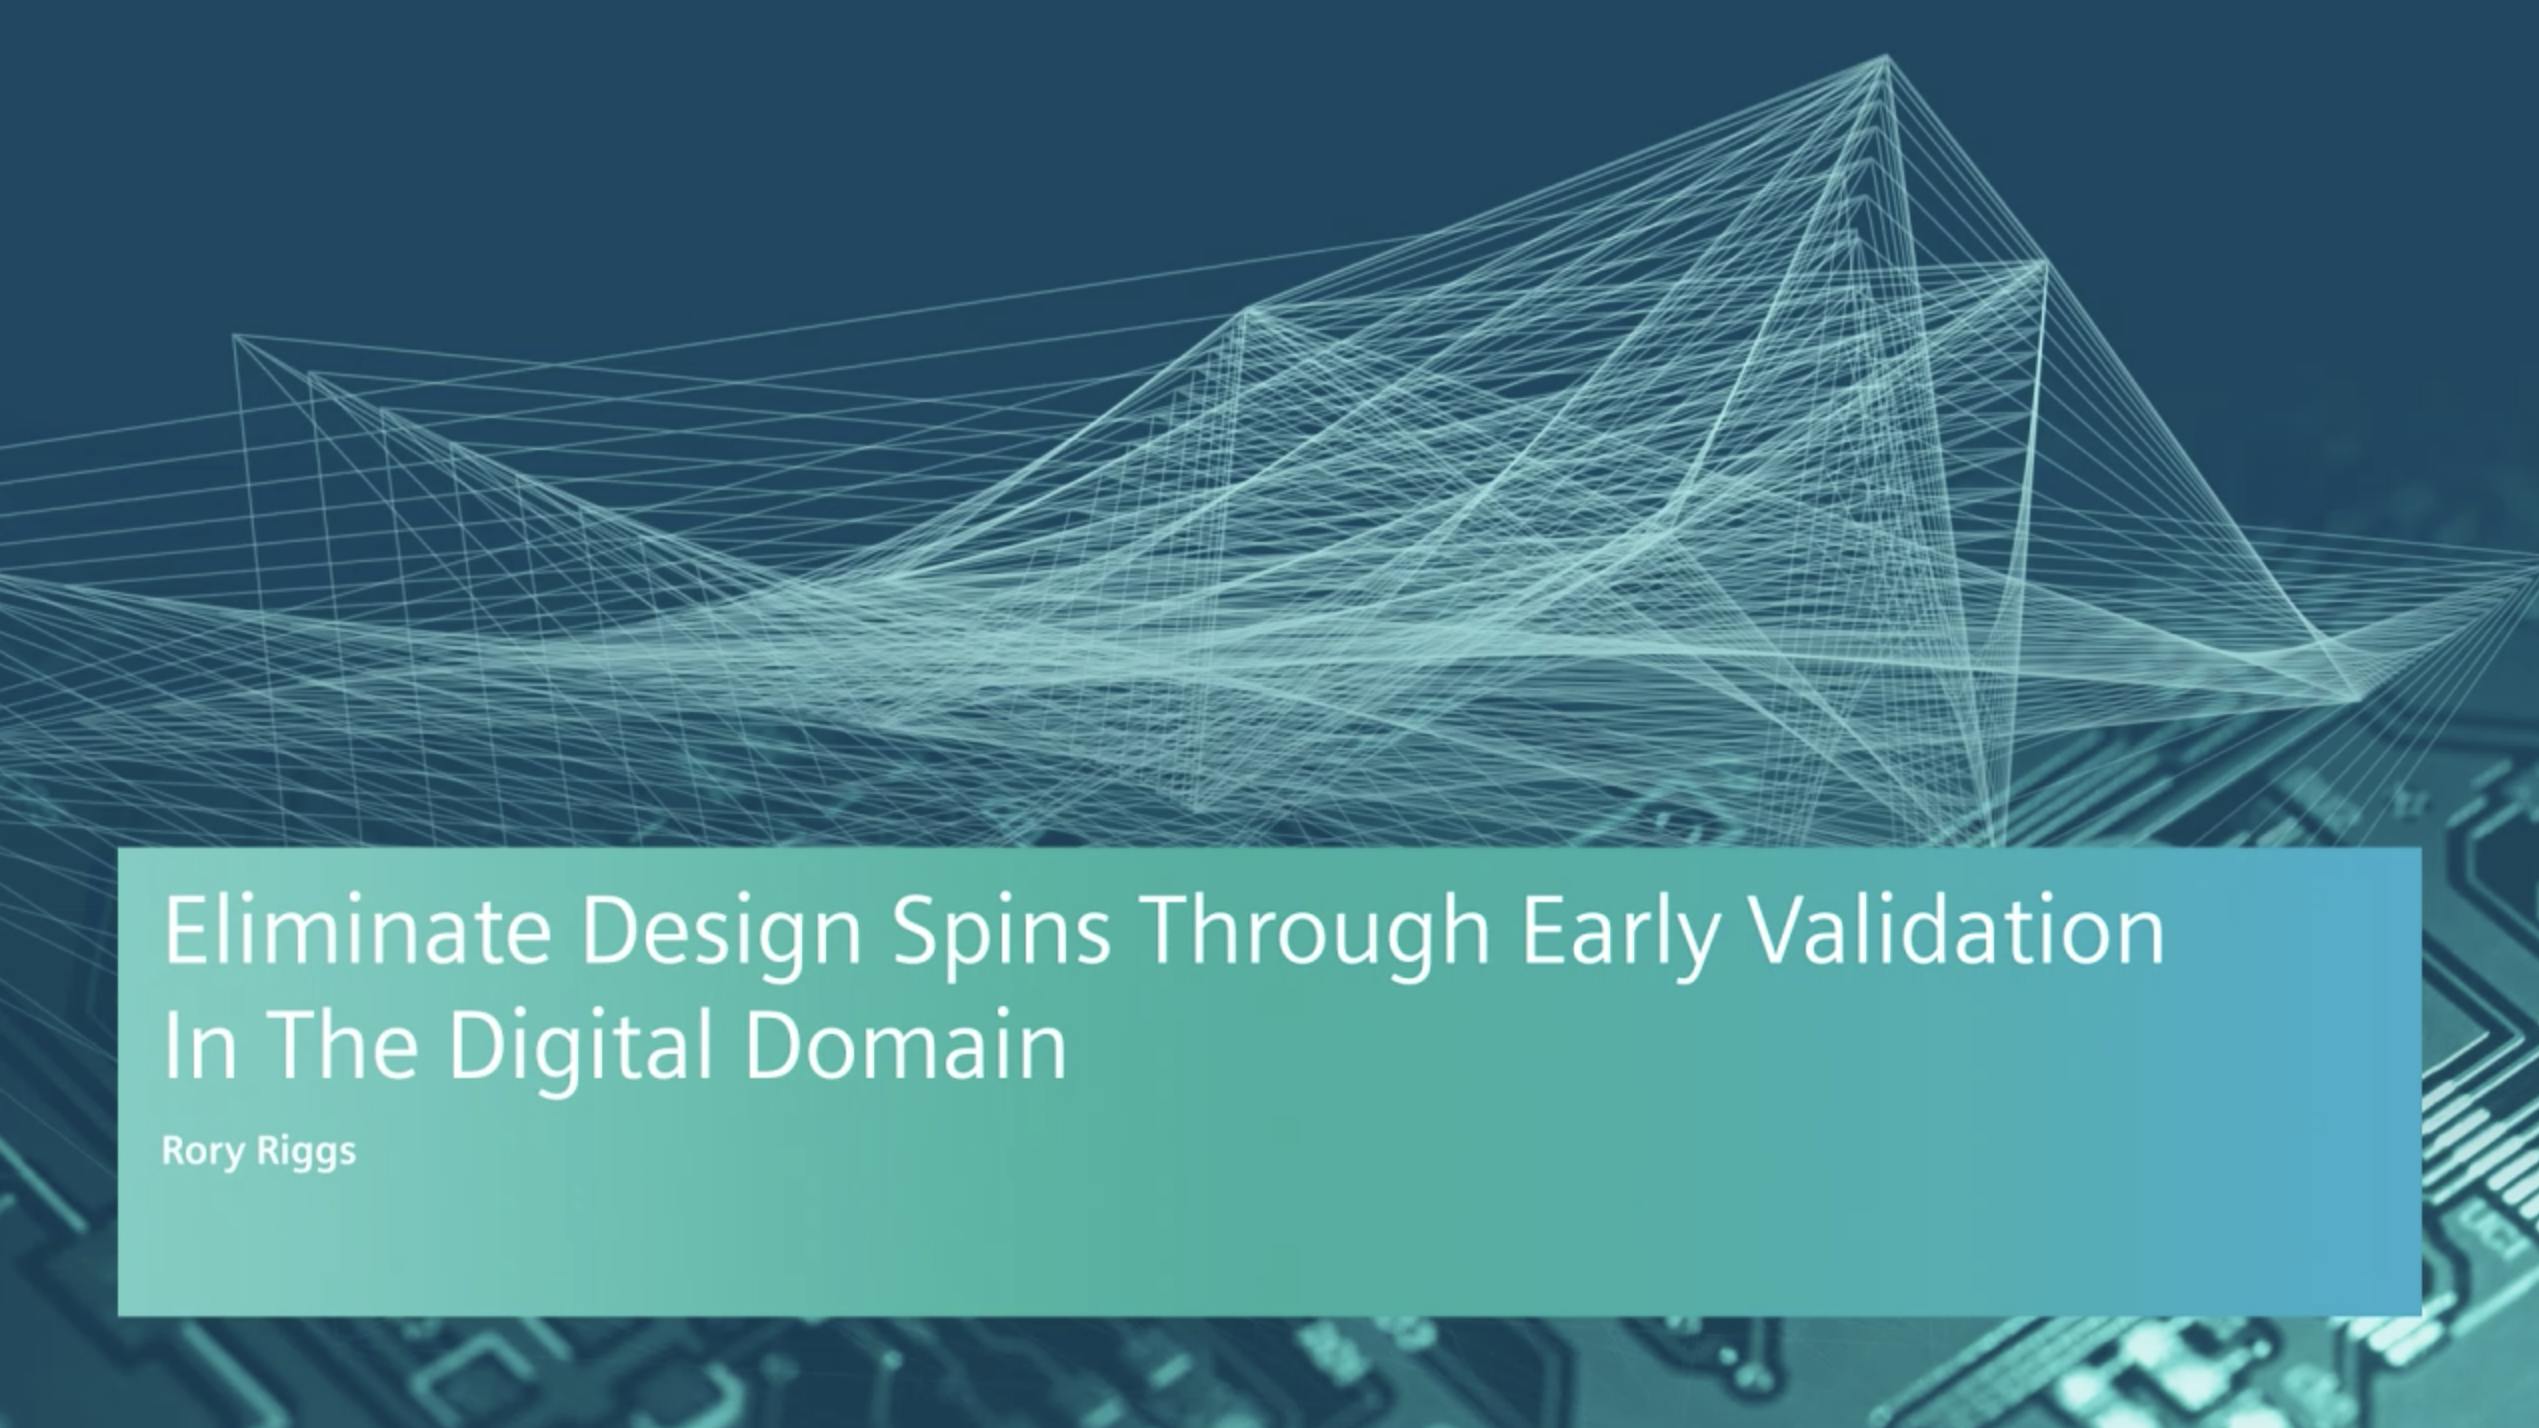 Eliminate Design Spins Through Early Validation in the Digital Domain